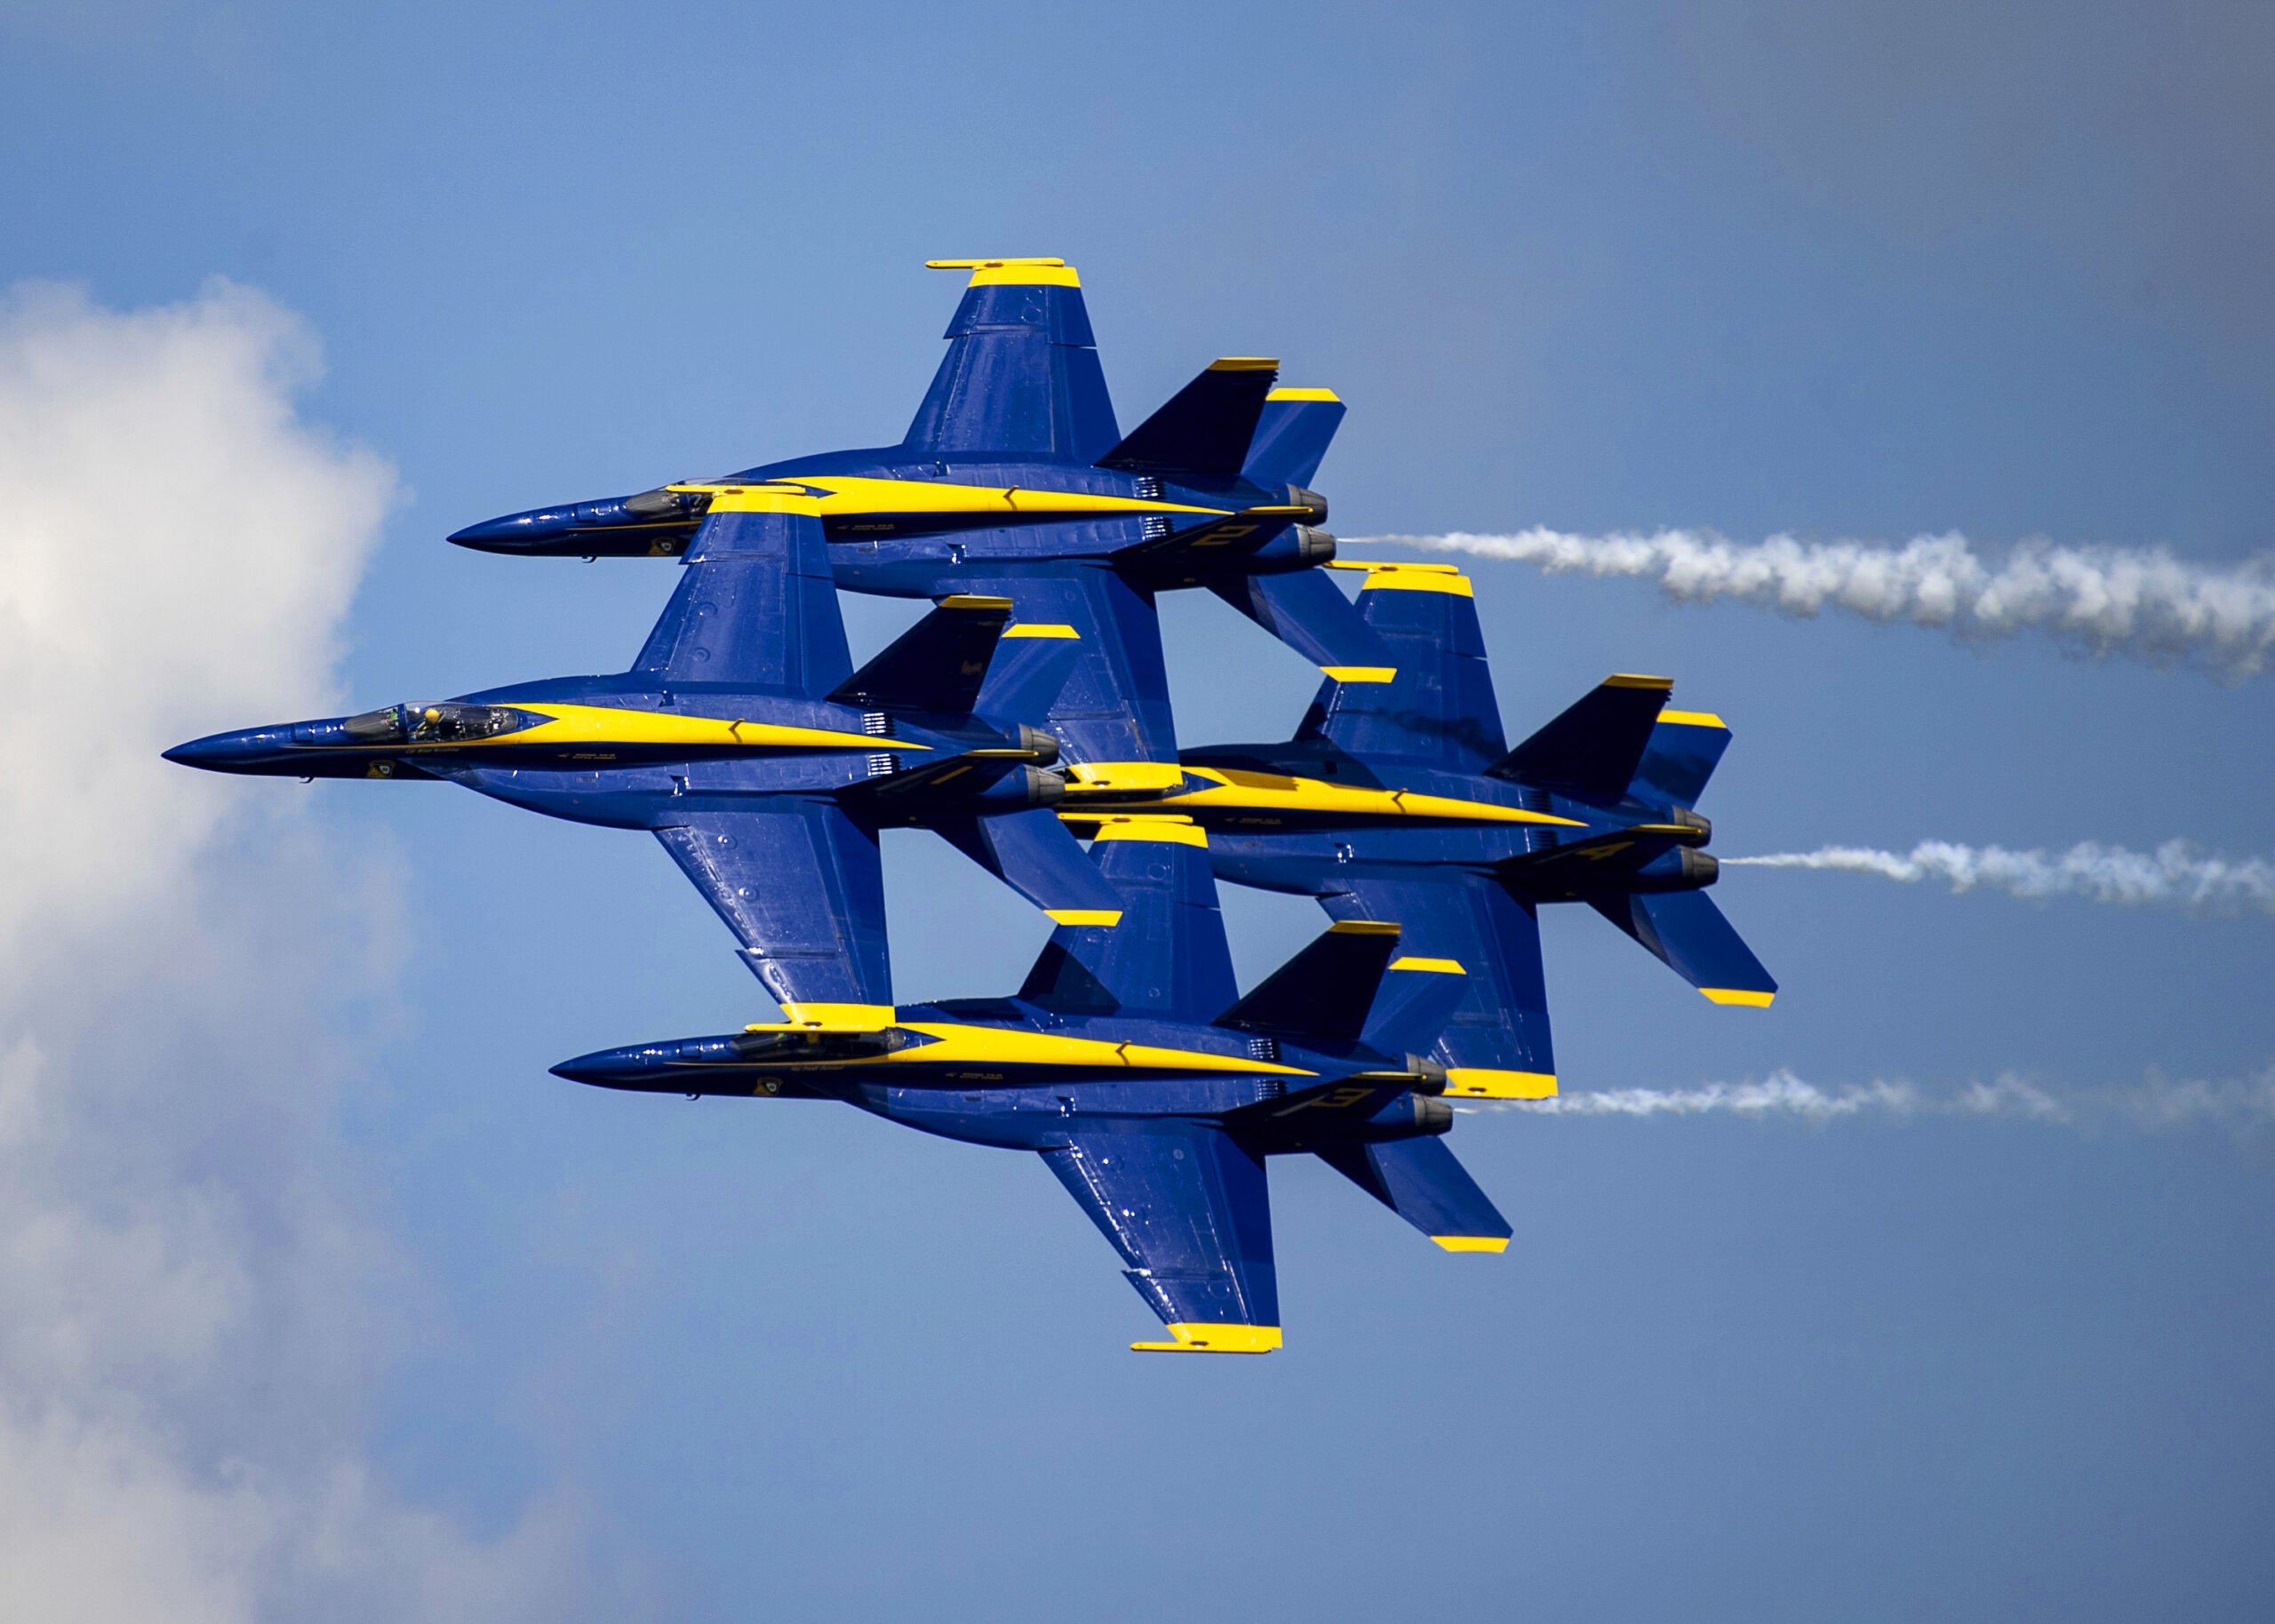 The Blue Angels Go Behind the Scenes